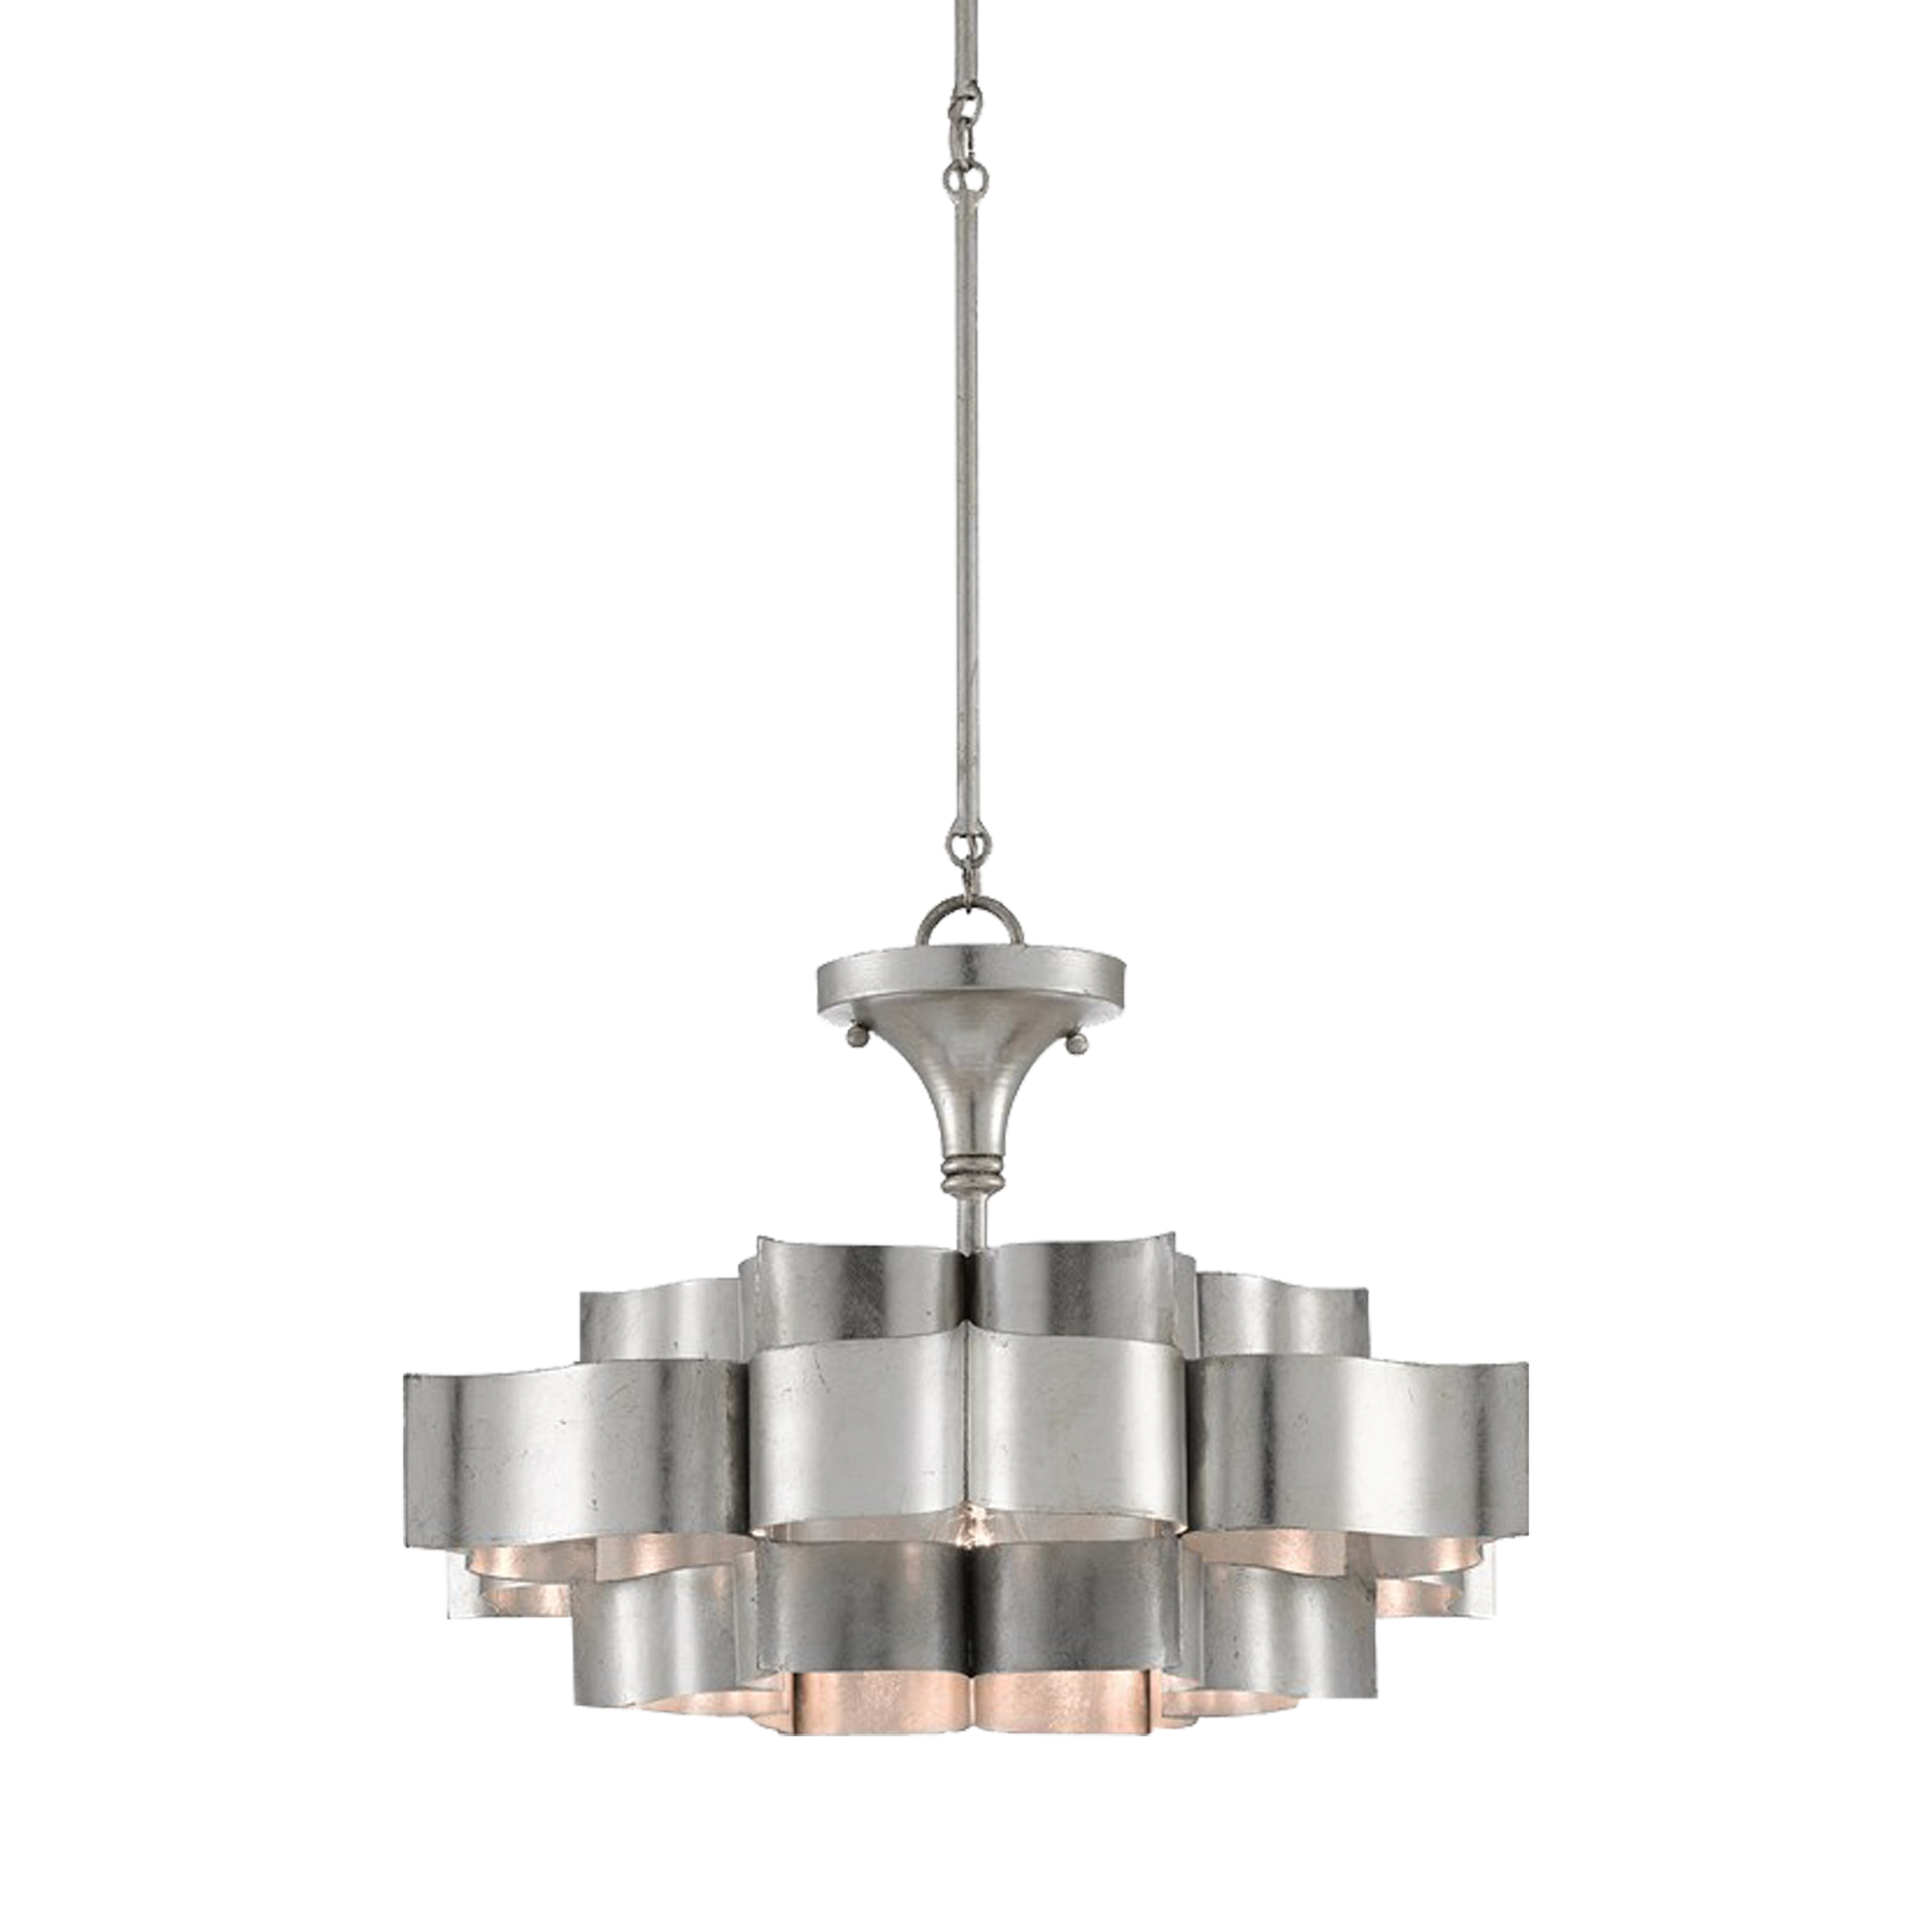 Undulations of luxurious silvery-hued metal treated to a contemporary silver leaf finish form the flowering silhouette of the Grand Lotus Chandelier.